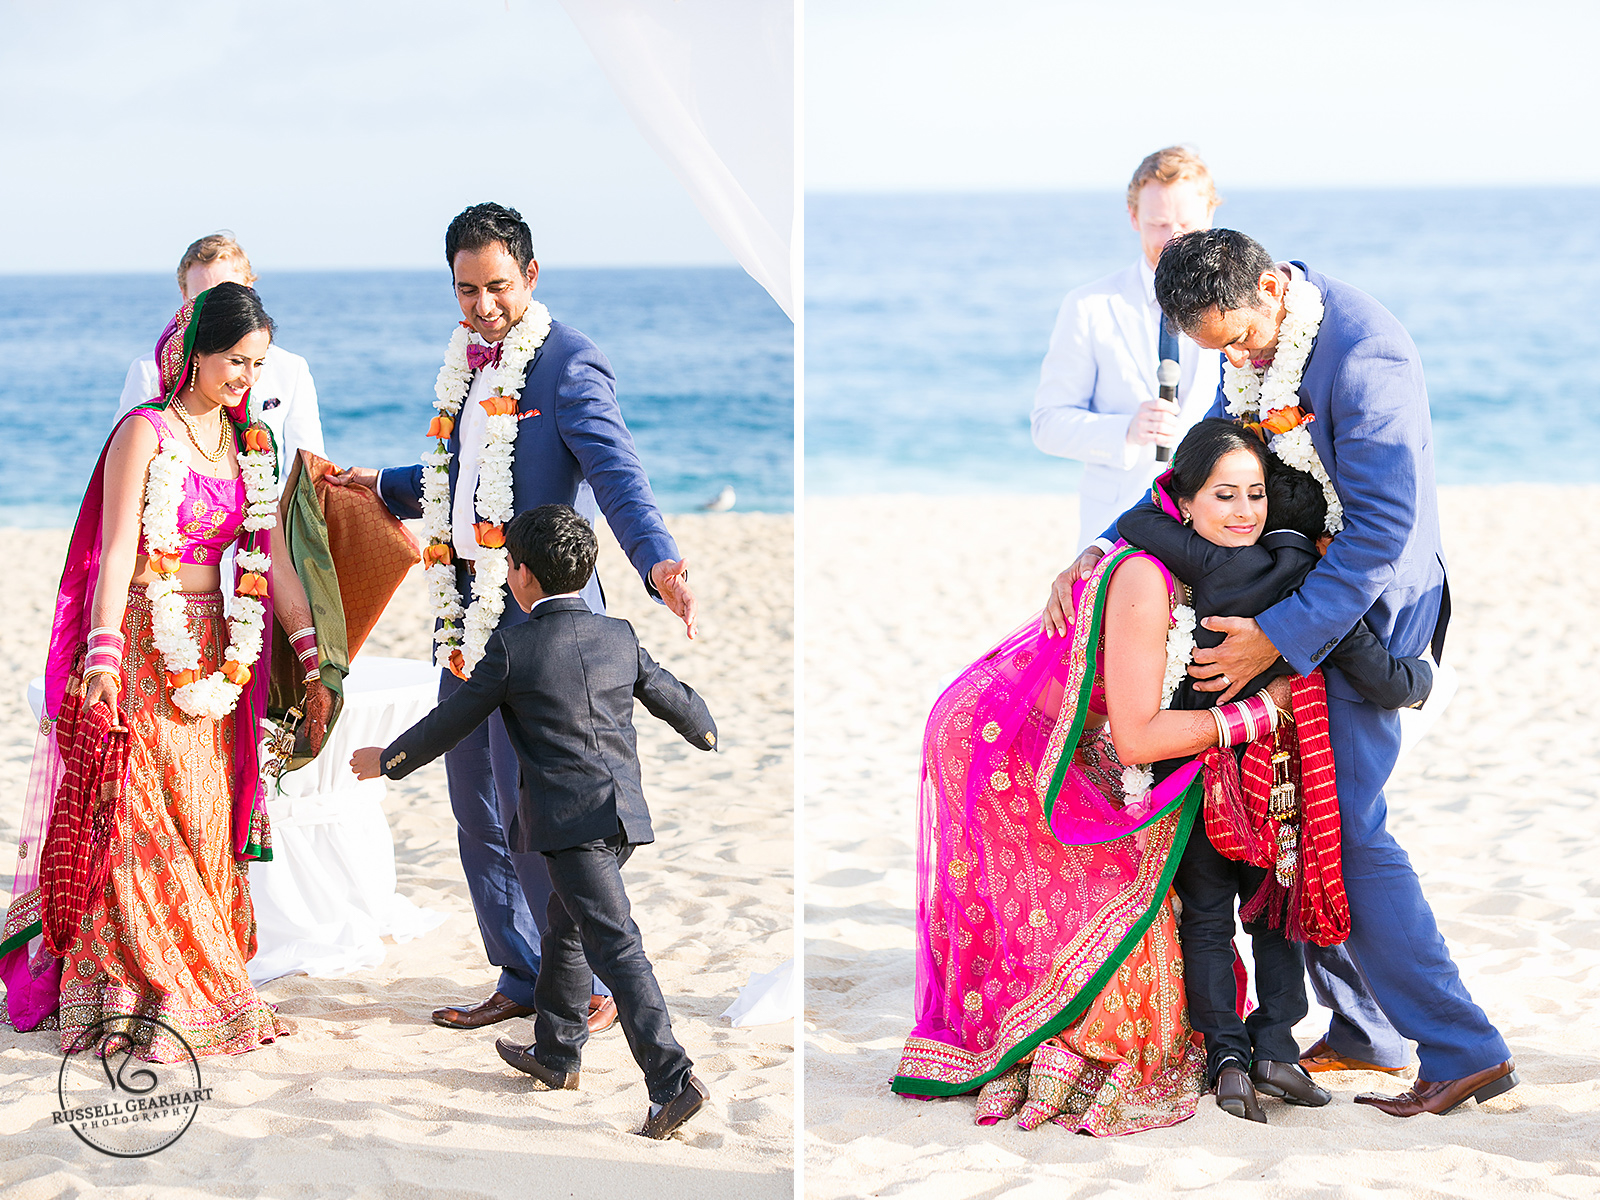 Son hugs bride and groom – Cabo San Lucas Destination Wedding – Russell Gearhart Photography – www.gearhartphoto.com